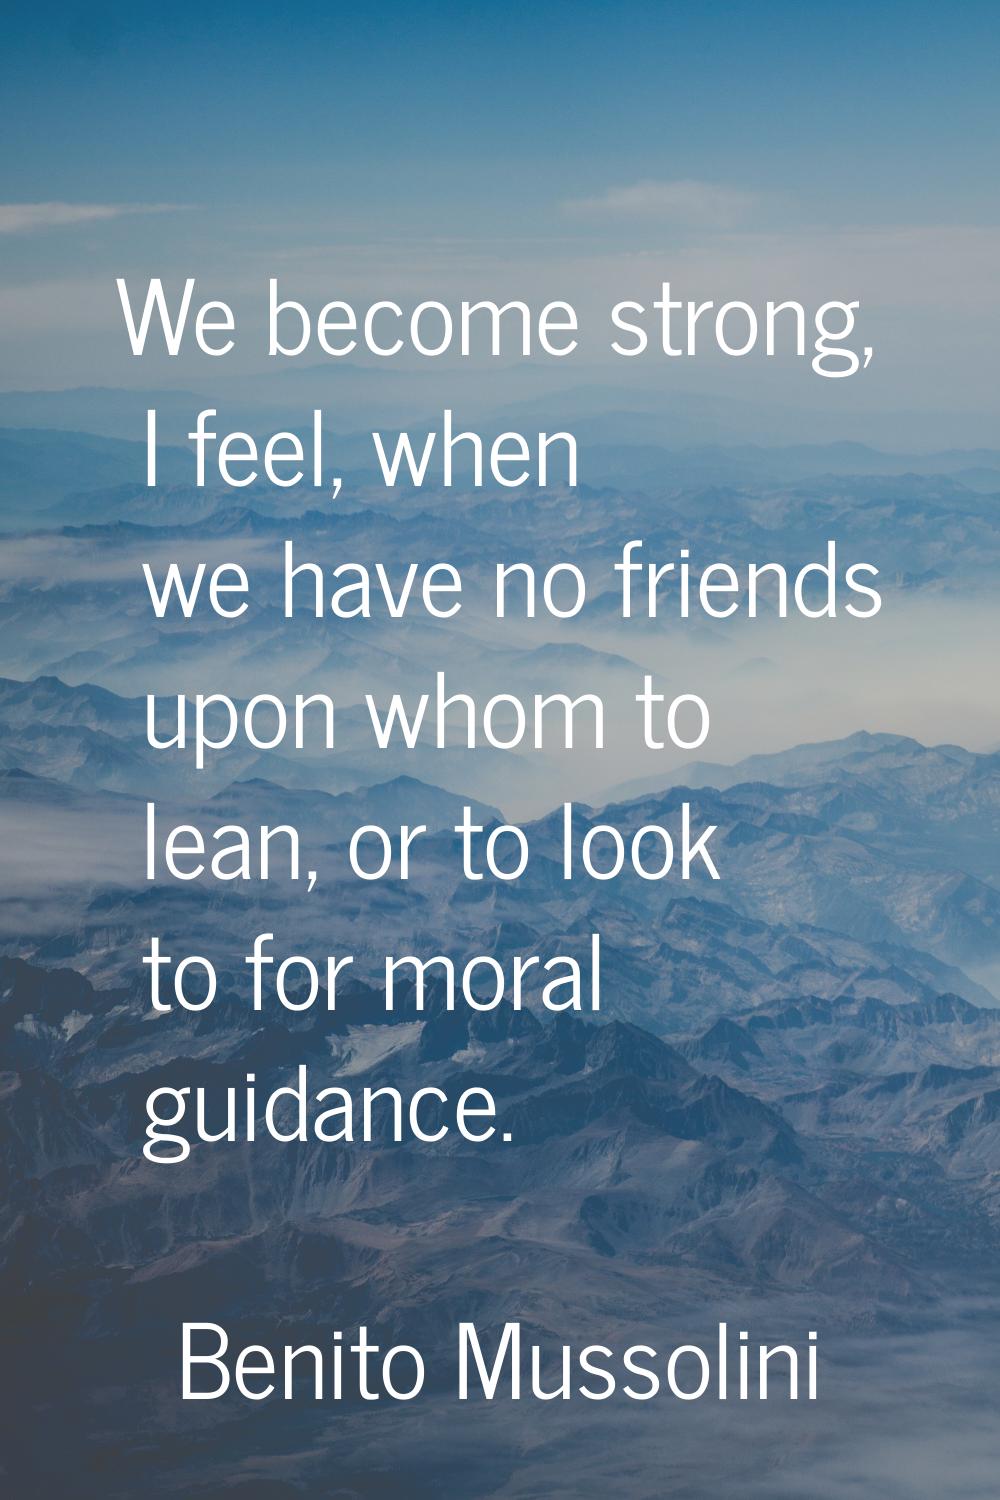 We become strong, I feel, when we have no friends upon whom to lean, or to look to for moral guidan